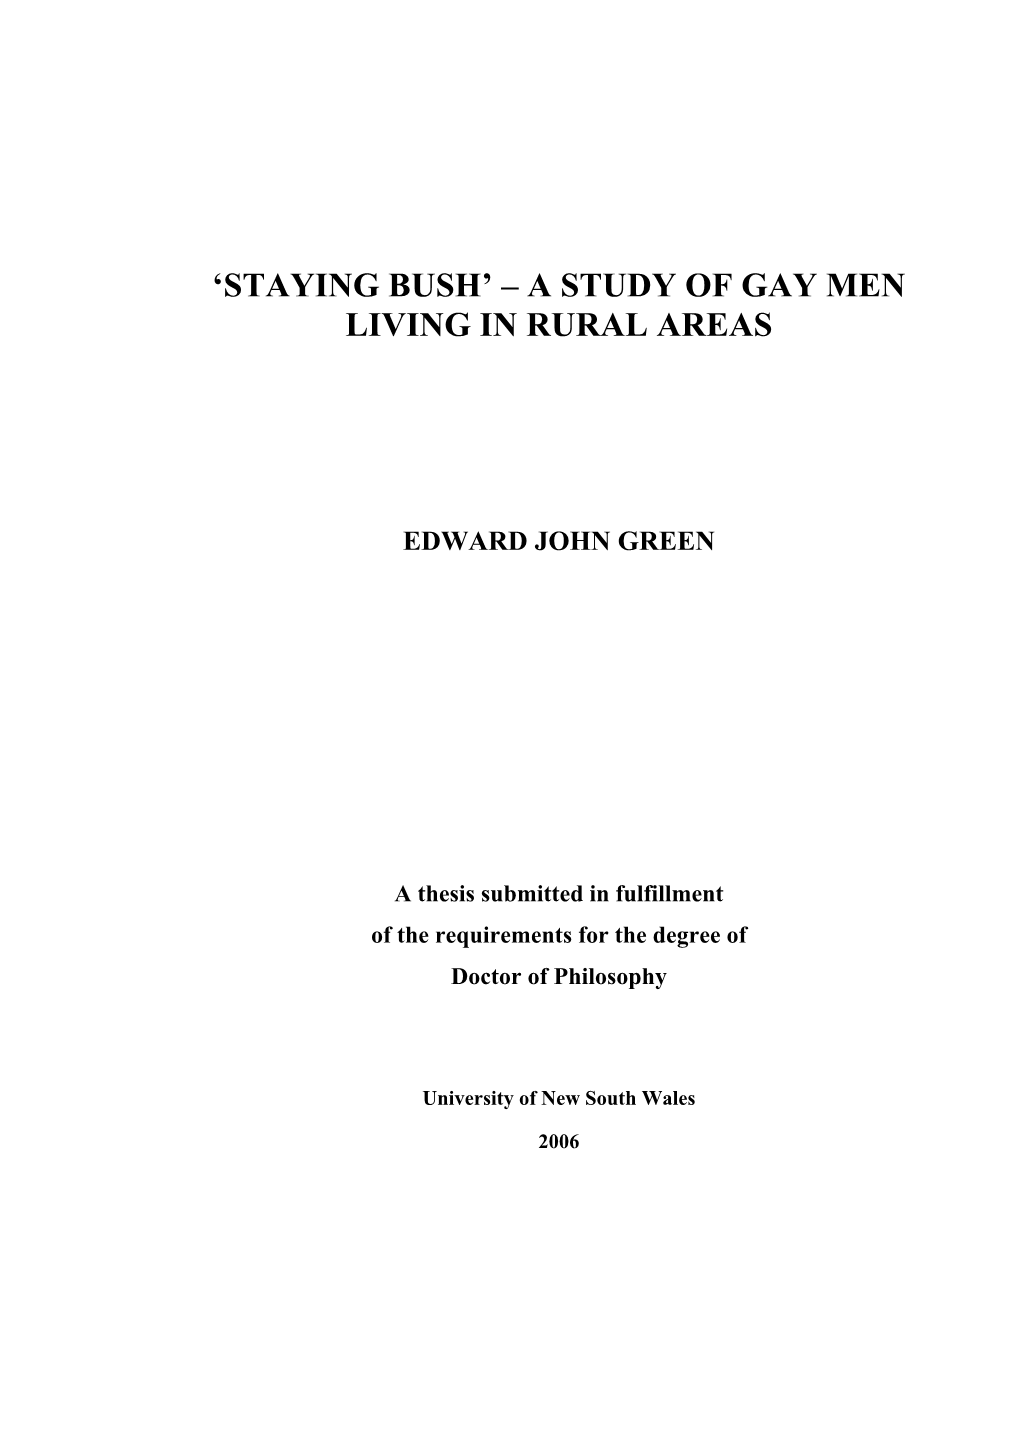 'Staying Bush' – a Study of Gay Men Living in Rural Areas